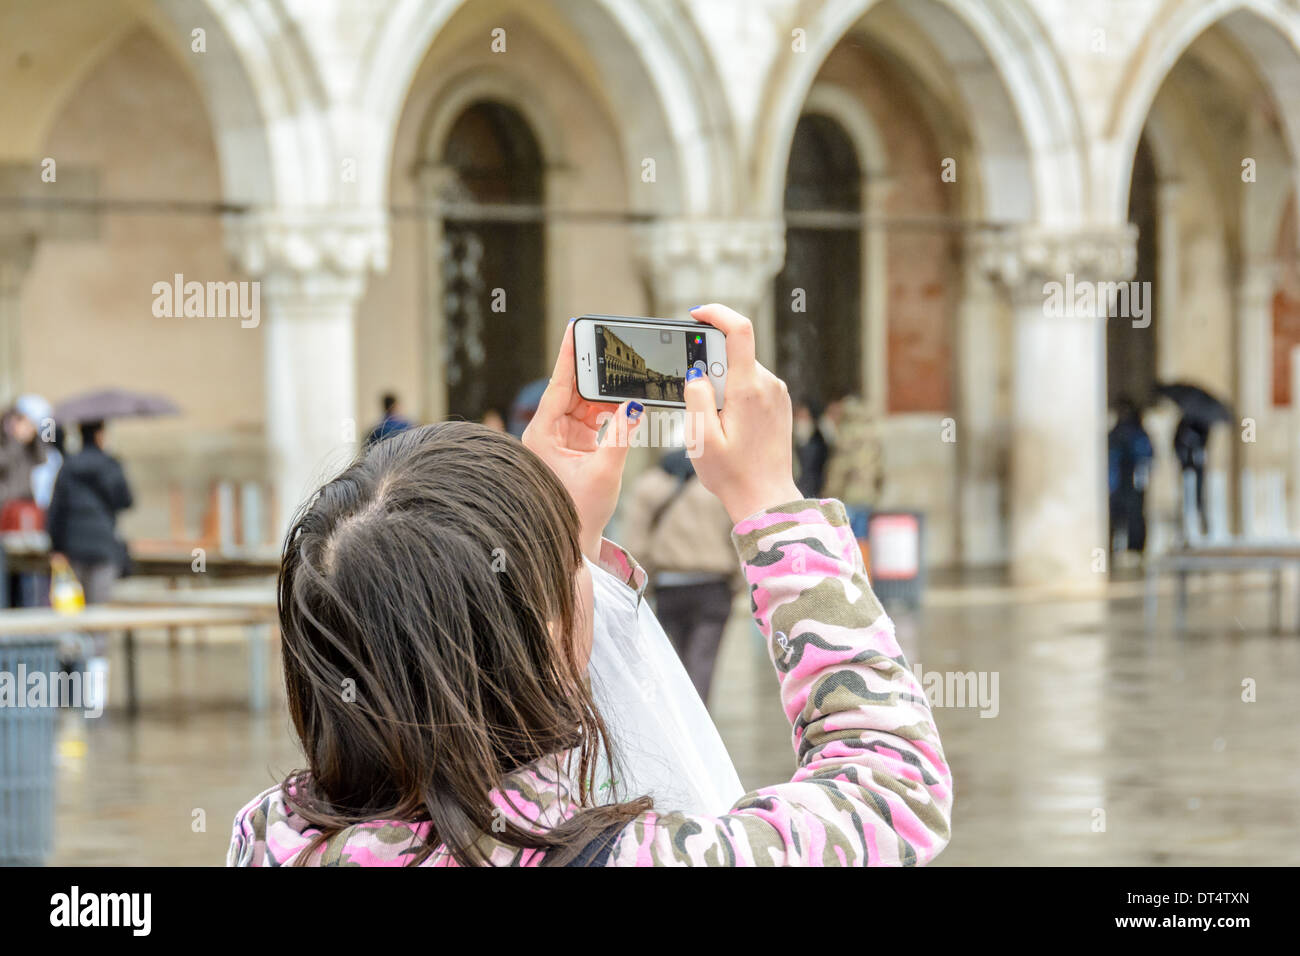 Venice, Italy. Asian girl in pink camouflage dress and blue varnished fingernails with Christian Dior logo, takes pictures of St Mark´s Square with a smartphone. Stock Photo